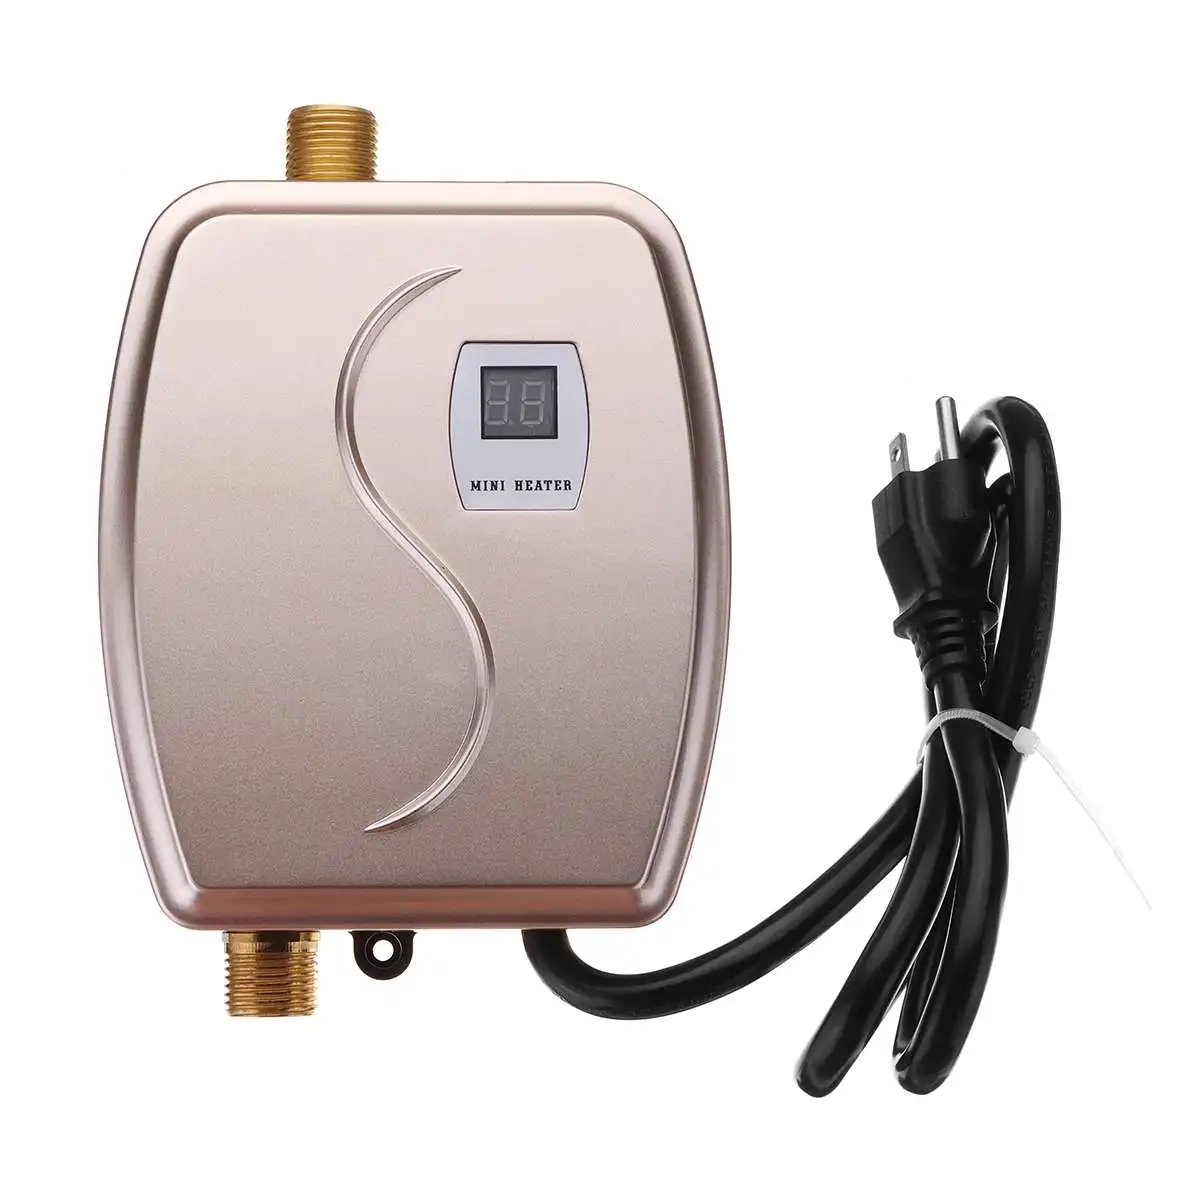 

3800W Mini Tankless Instant Hot Water Heater Faucet kitchen Heating Thermostat US/EU Plug Intelligent Energy Saving Waterproof